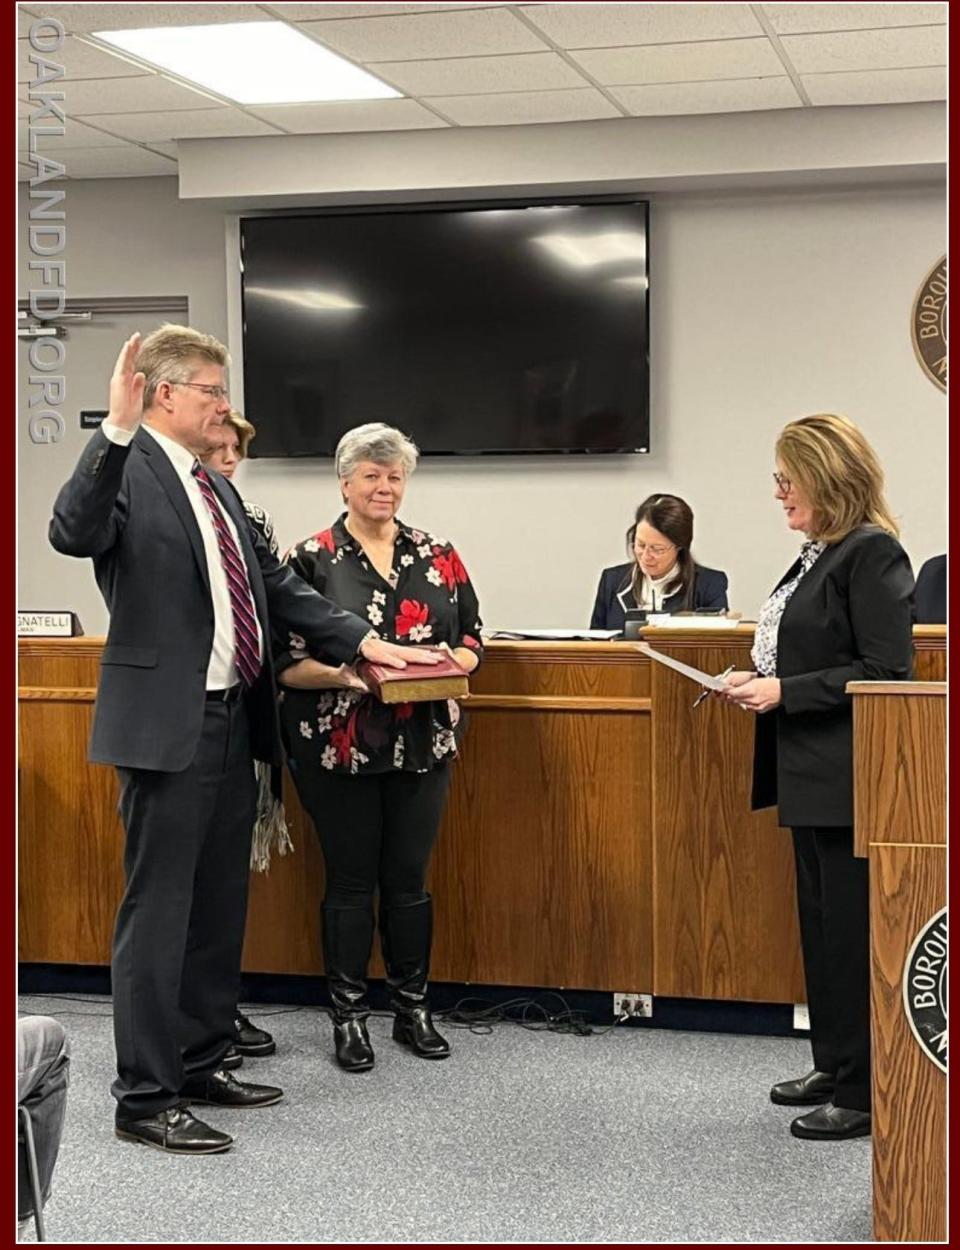 State Sen. Holly Schepisi (R-Dist. 39) issues the oath of office to Oakland Mayor Eric Kulmala Jan. 7 while his wife Brenda holds the Bible.